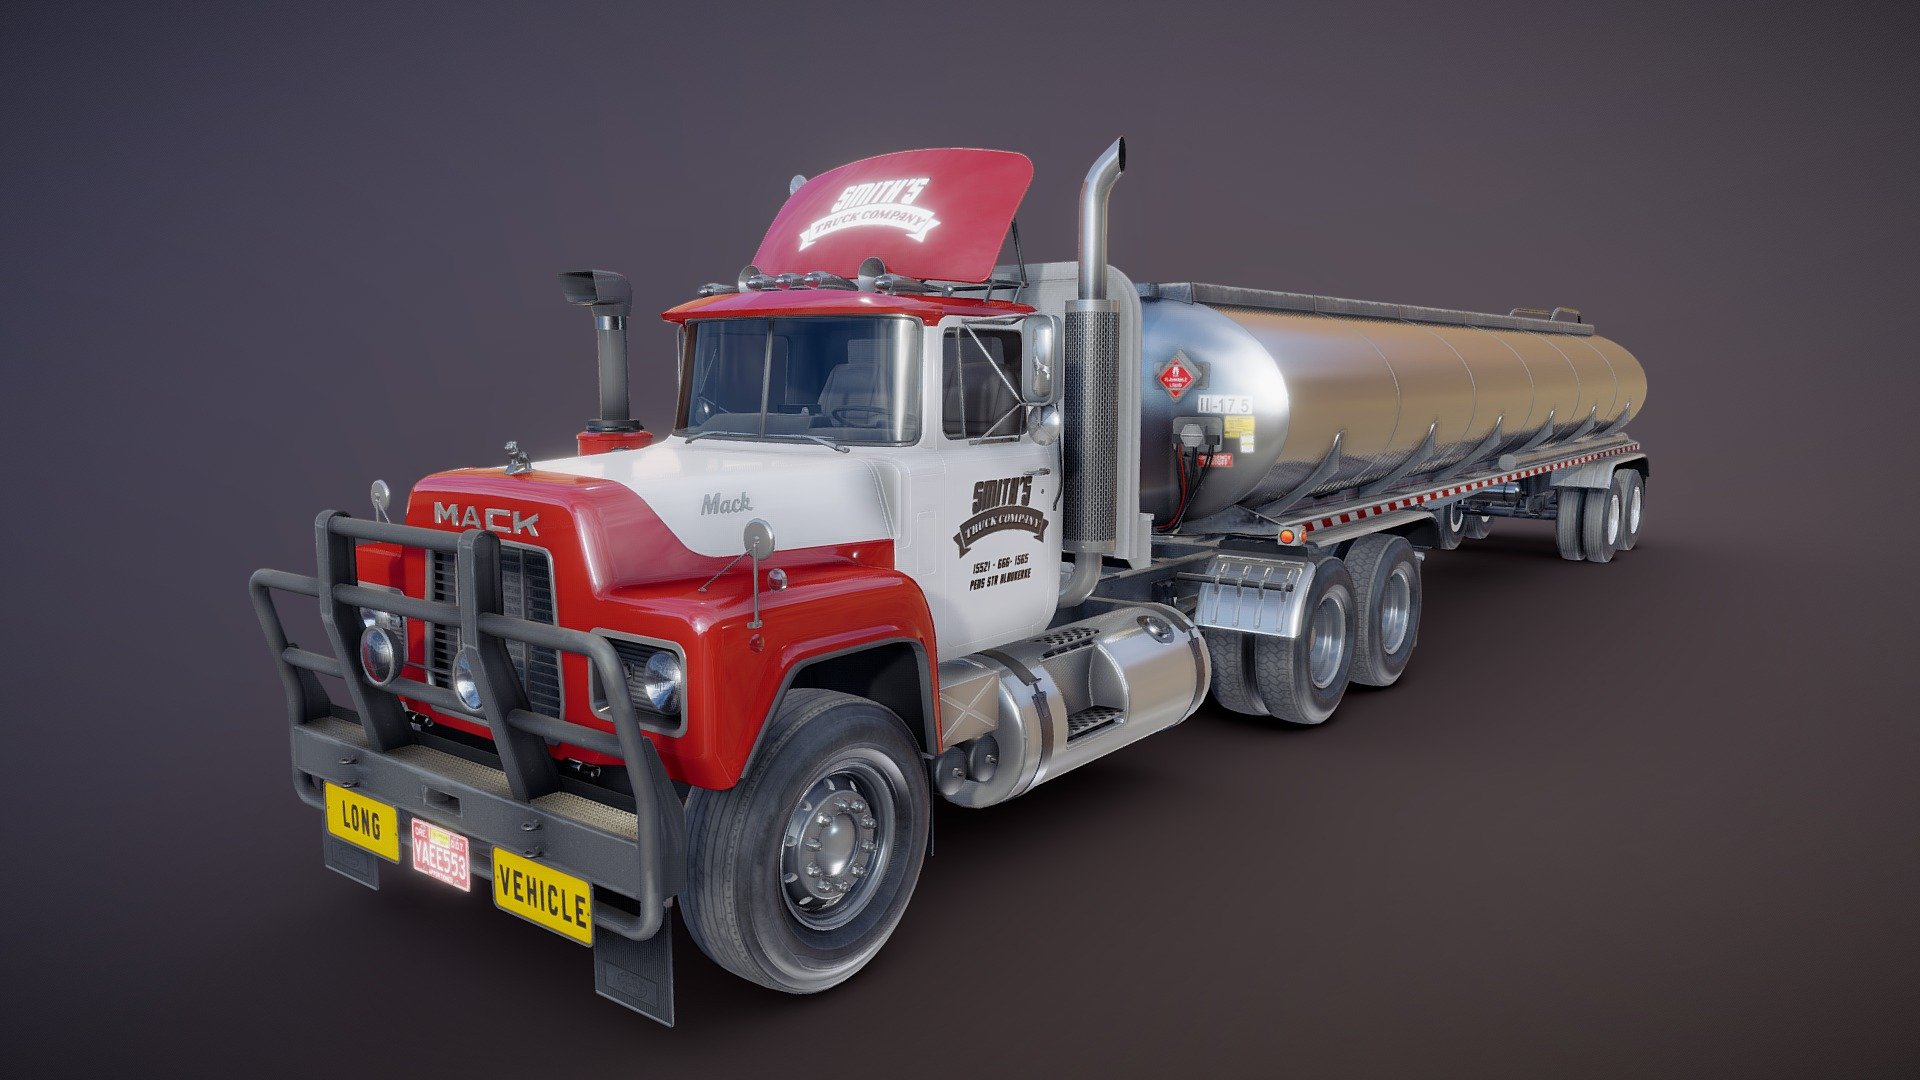 Vintage american tanker truck game ready model.

Full textured model with clean topology.

High accuracy exterior model.

Steering wheel and shifter stick are separeted meshes.

High detailed cabin - seams, rivets, chrome parts, wipers and etc.

High detailed rear air suspension with axles and other parts.

Different tires for rear and front wheels.

Different wheels for rig and trailer.

Emblems are separated models with texture.

High detailed rims and tires, with PBR maps(Base_Color/Metallic/Normal/Roughness.png2048x2048 )

Additional color schemes for cabin red, yellow, blue, brown.

Model ready for real-time apps, games, virtual reality and augmented reality.

Asset looks accuracy and realistic and become a good part of your project 3d model